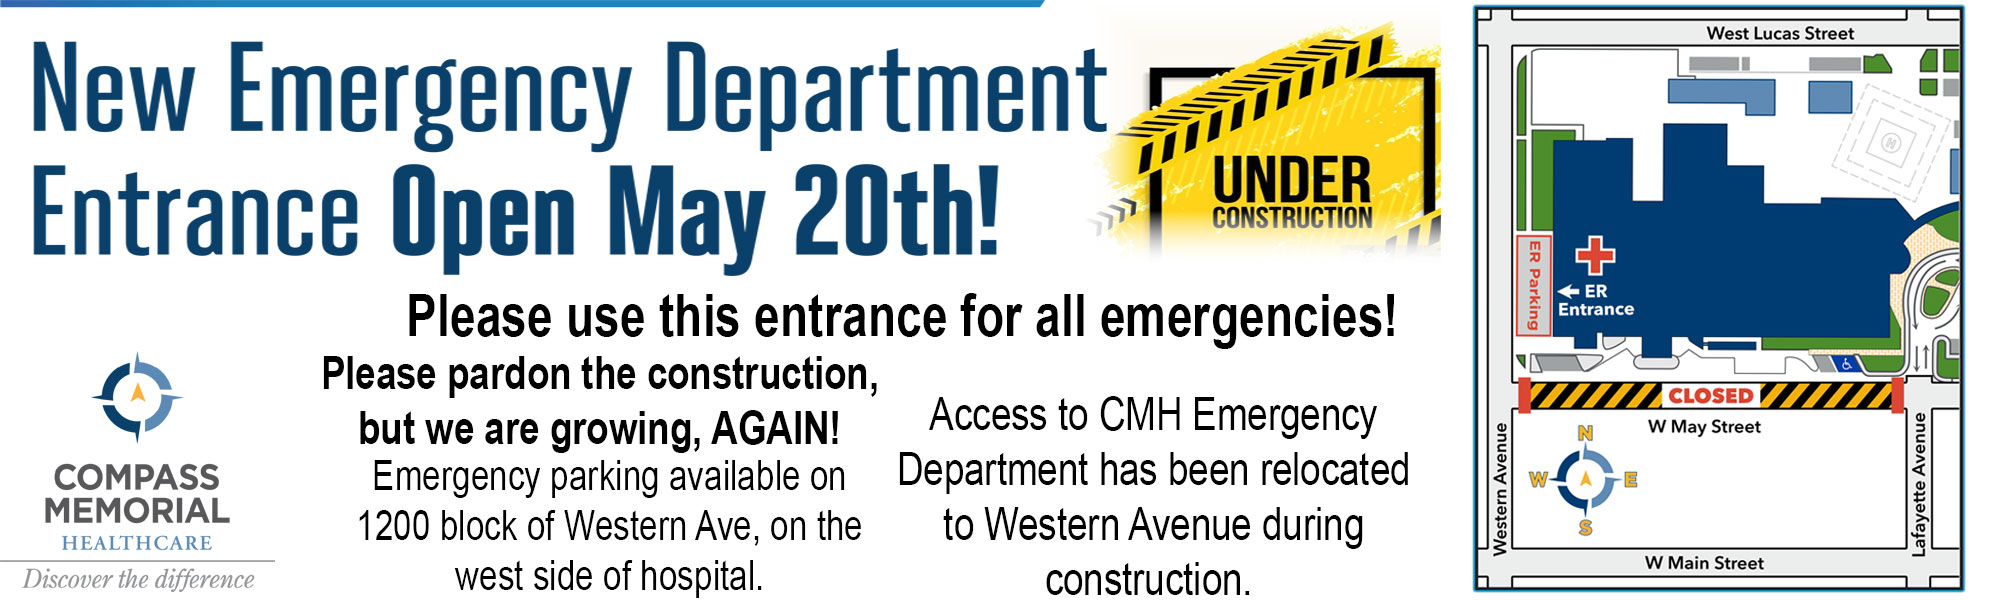 Under Construction 
New Emergency Department Entrance Open May 20th!

Please use this entrance for all emergencies!
Please pardon the construction, but we are growing, AGAIN! Emergency parking available on 
1200 block of Western Avenue, on the west side of the hospital.
Access to CMH Emergency Department has been relocated to Western Avenue during Construction

Compass Memorial Healthcare